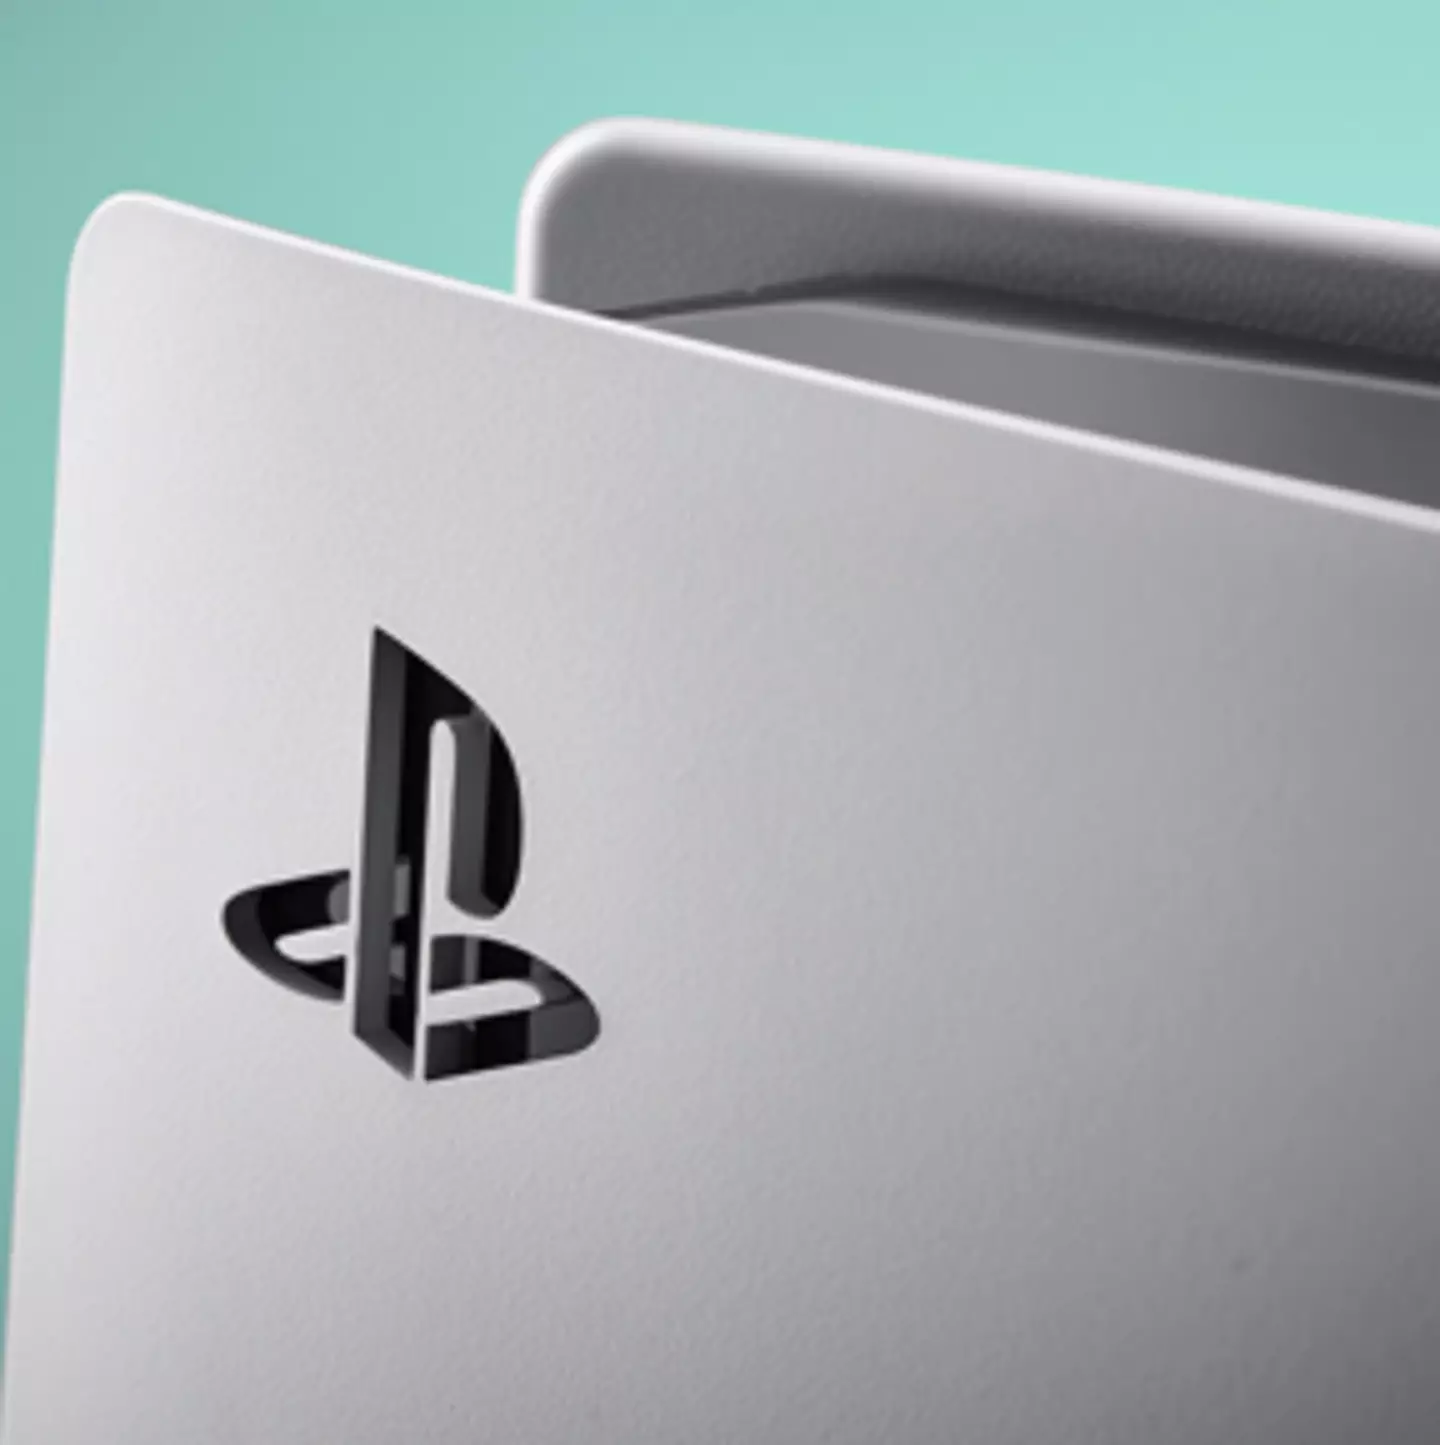 PlayStation users say digital purchases wiped due to 'software bug'